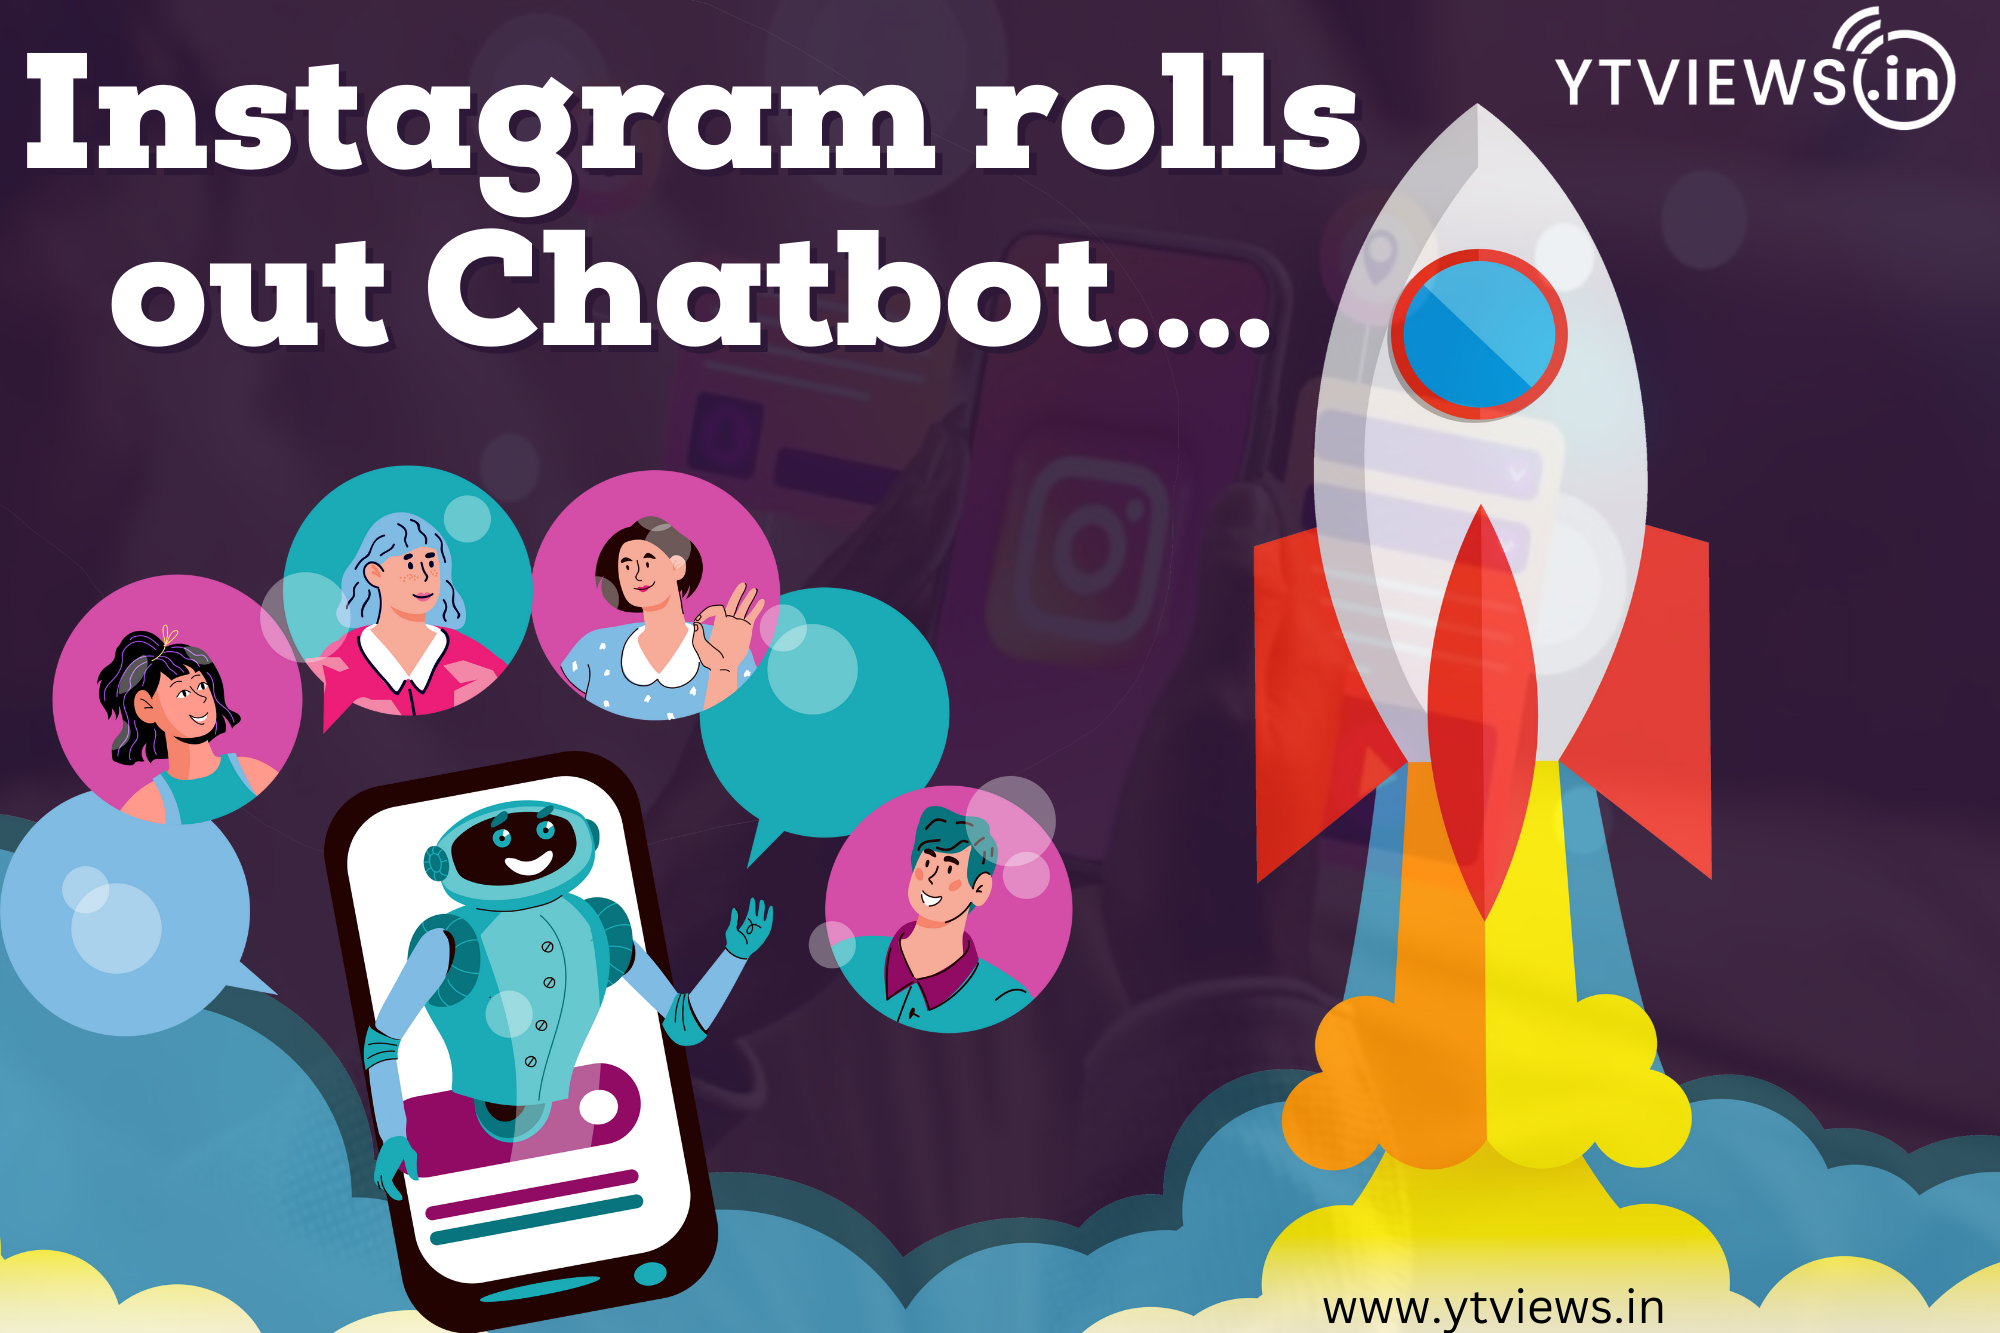 The AI widespread continues: Instagram to launch its own ChatBot